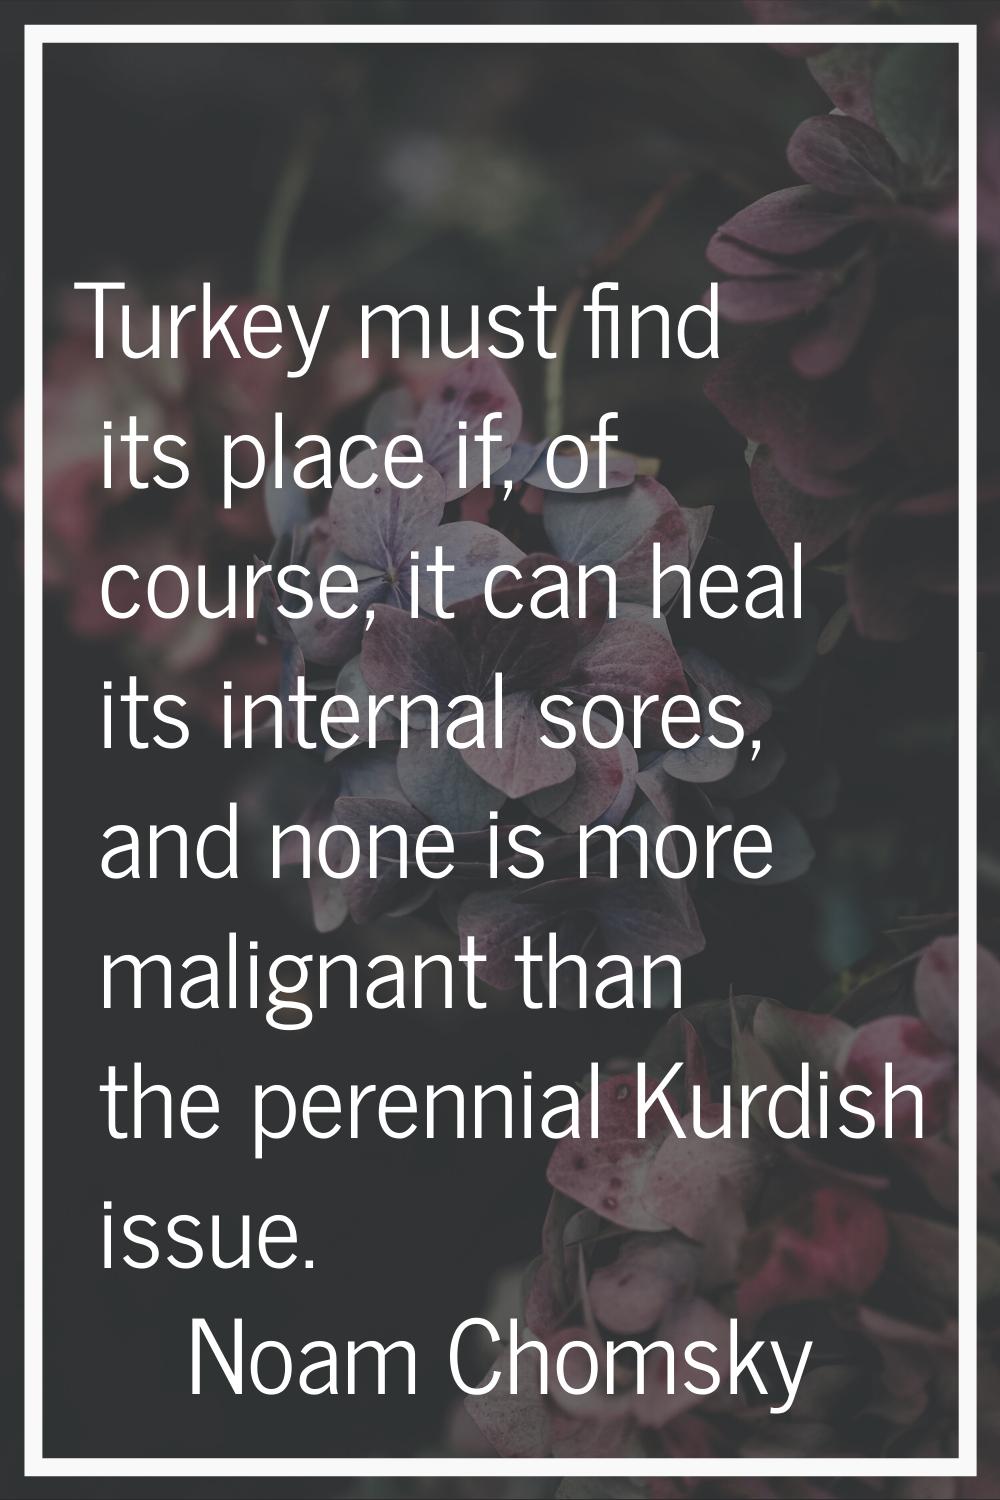 Turkey must find its place if, of course, it can heal its internal sores, and none is more malignan